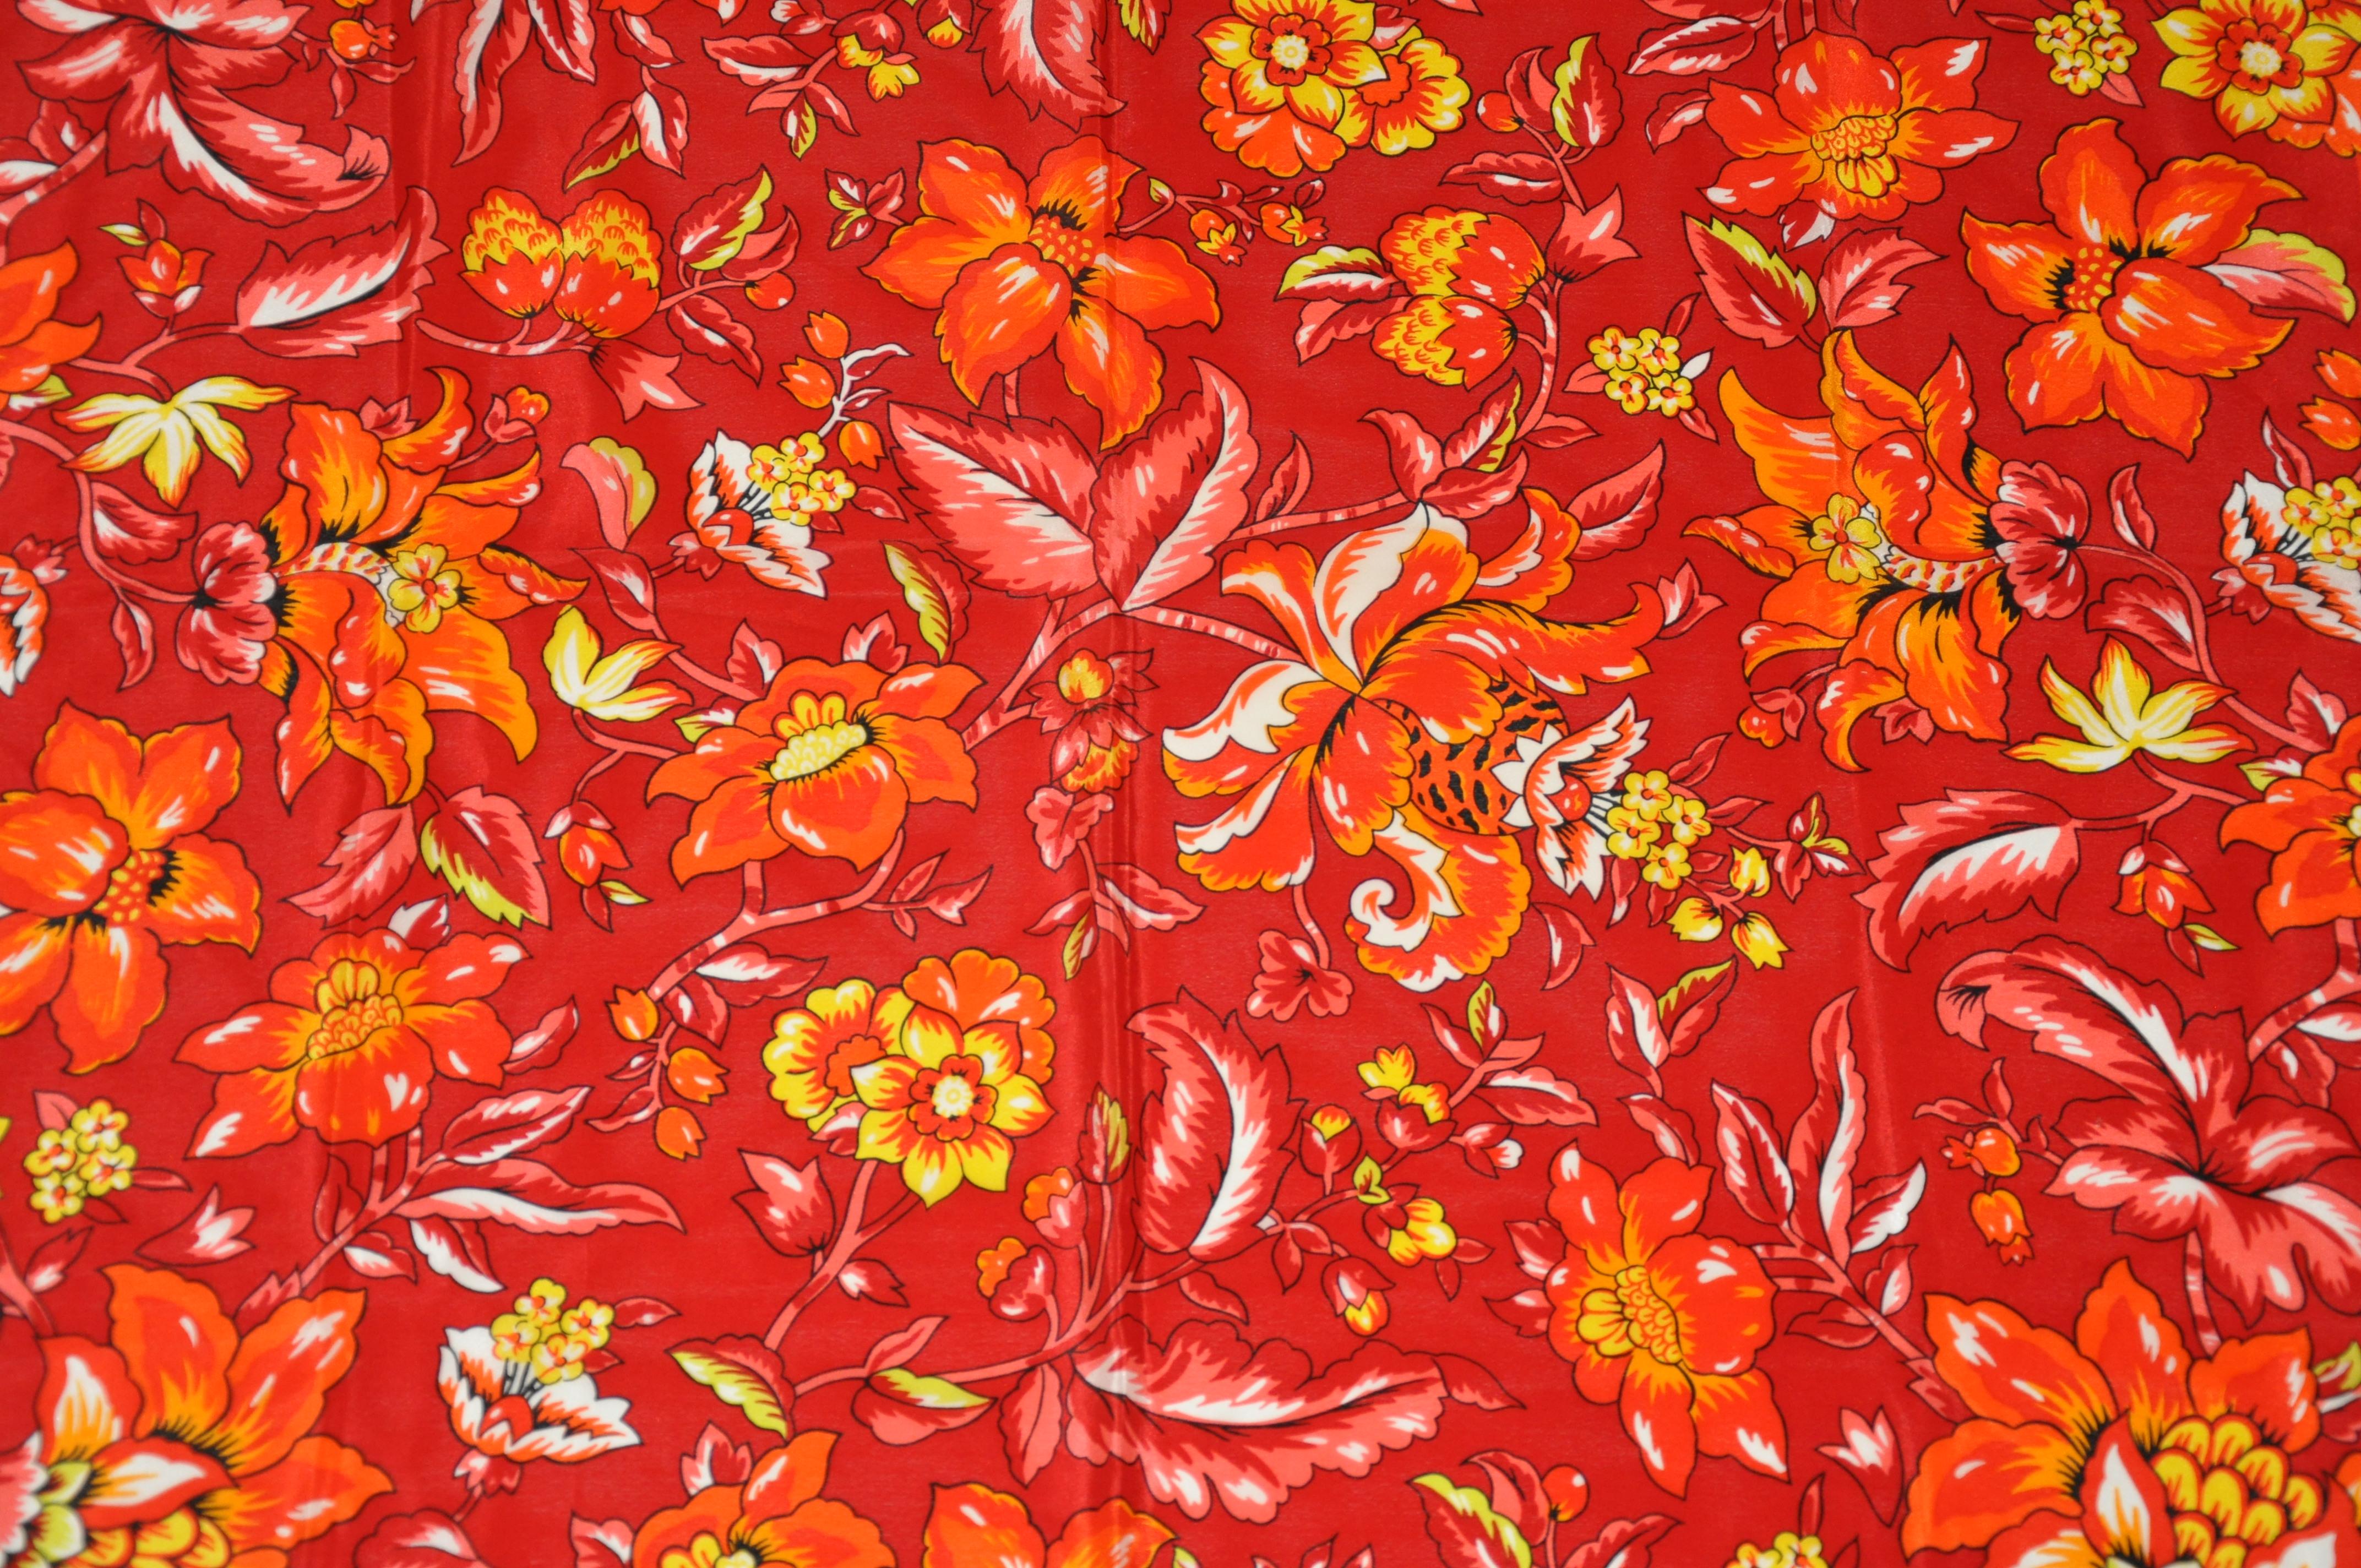      Adrienne Vittadini wonderfully glorious floral silk scarf in bold shades of reds and tangerine measures 31 inches by 30 inches. Rolled edges and made in Italy.